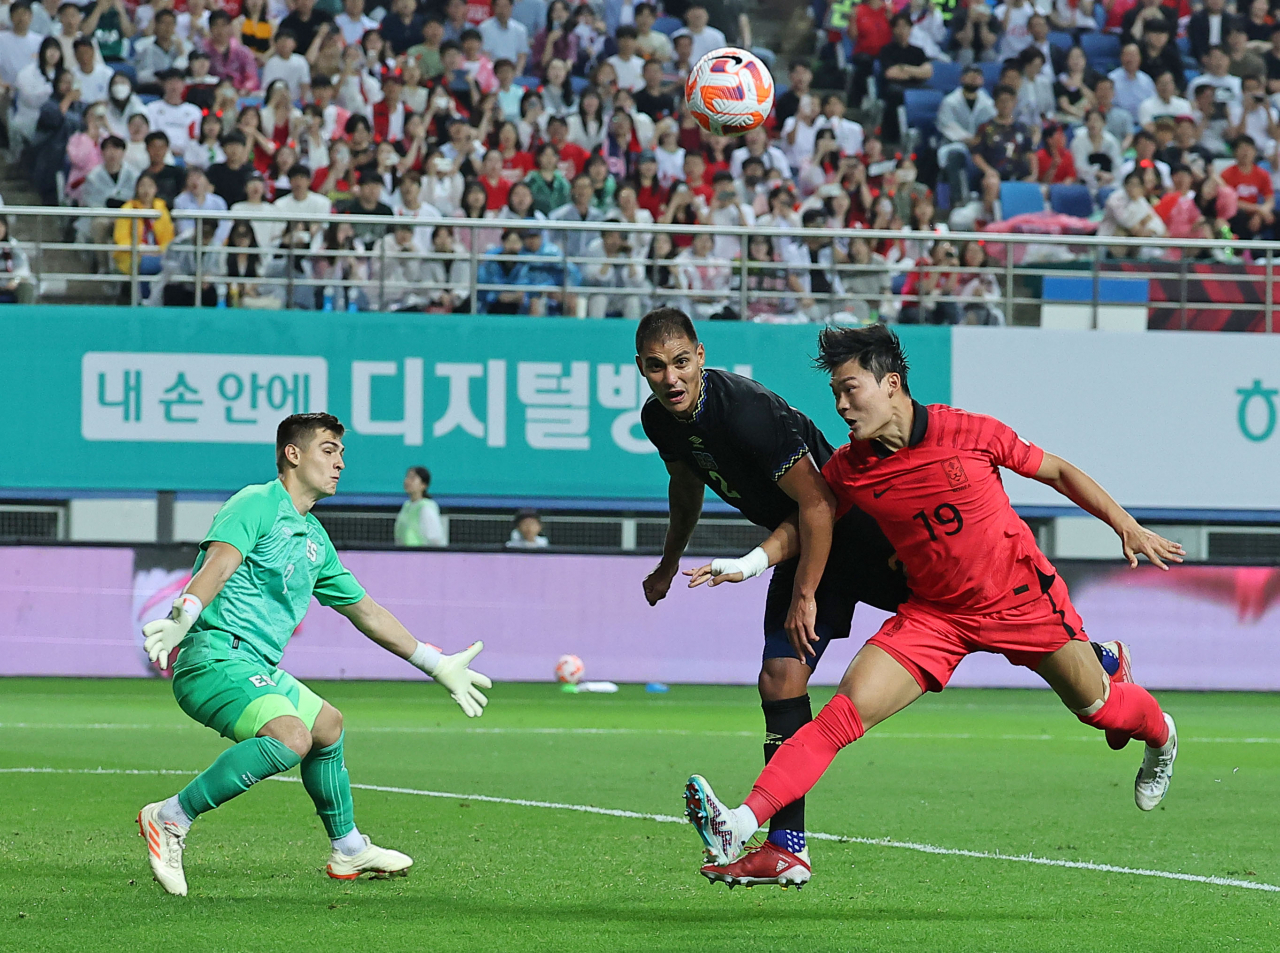 In this photo from June 20, Oh Hyeon-gyu of South Korea (Right) attempts a header against El Salvador during a men's friendly football match at Daejeon World Cup Stadium in Daejeon, 140 kilometers south of Seoul. (Yonhap)